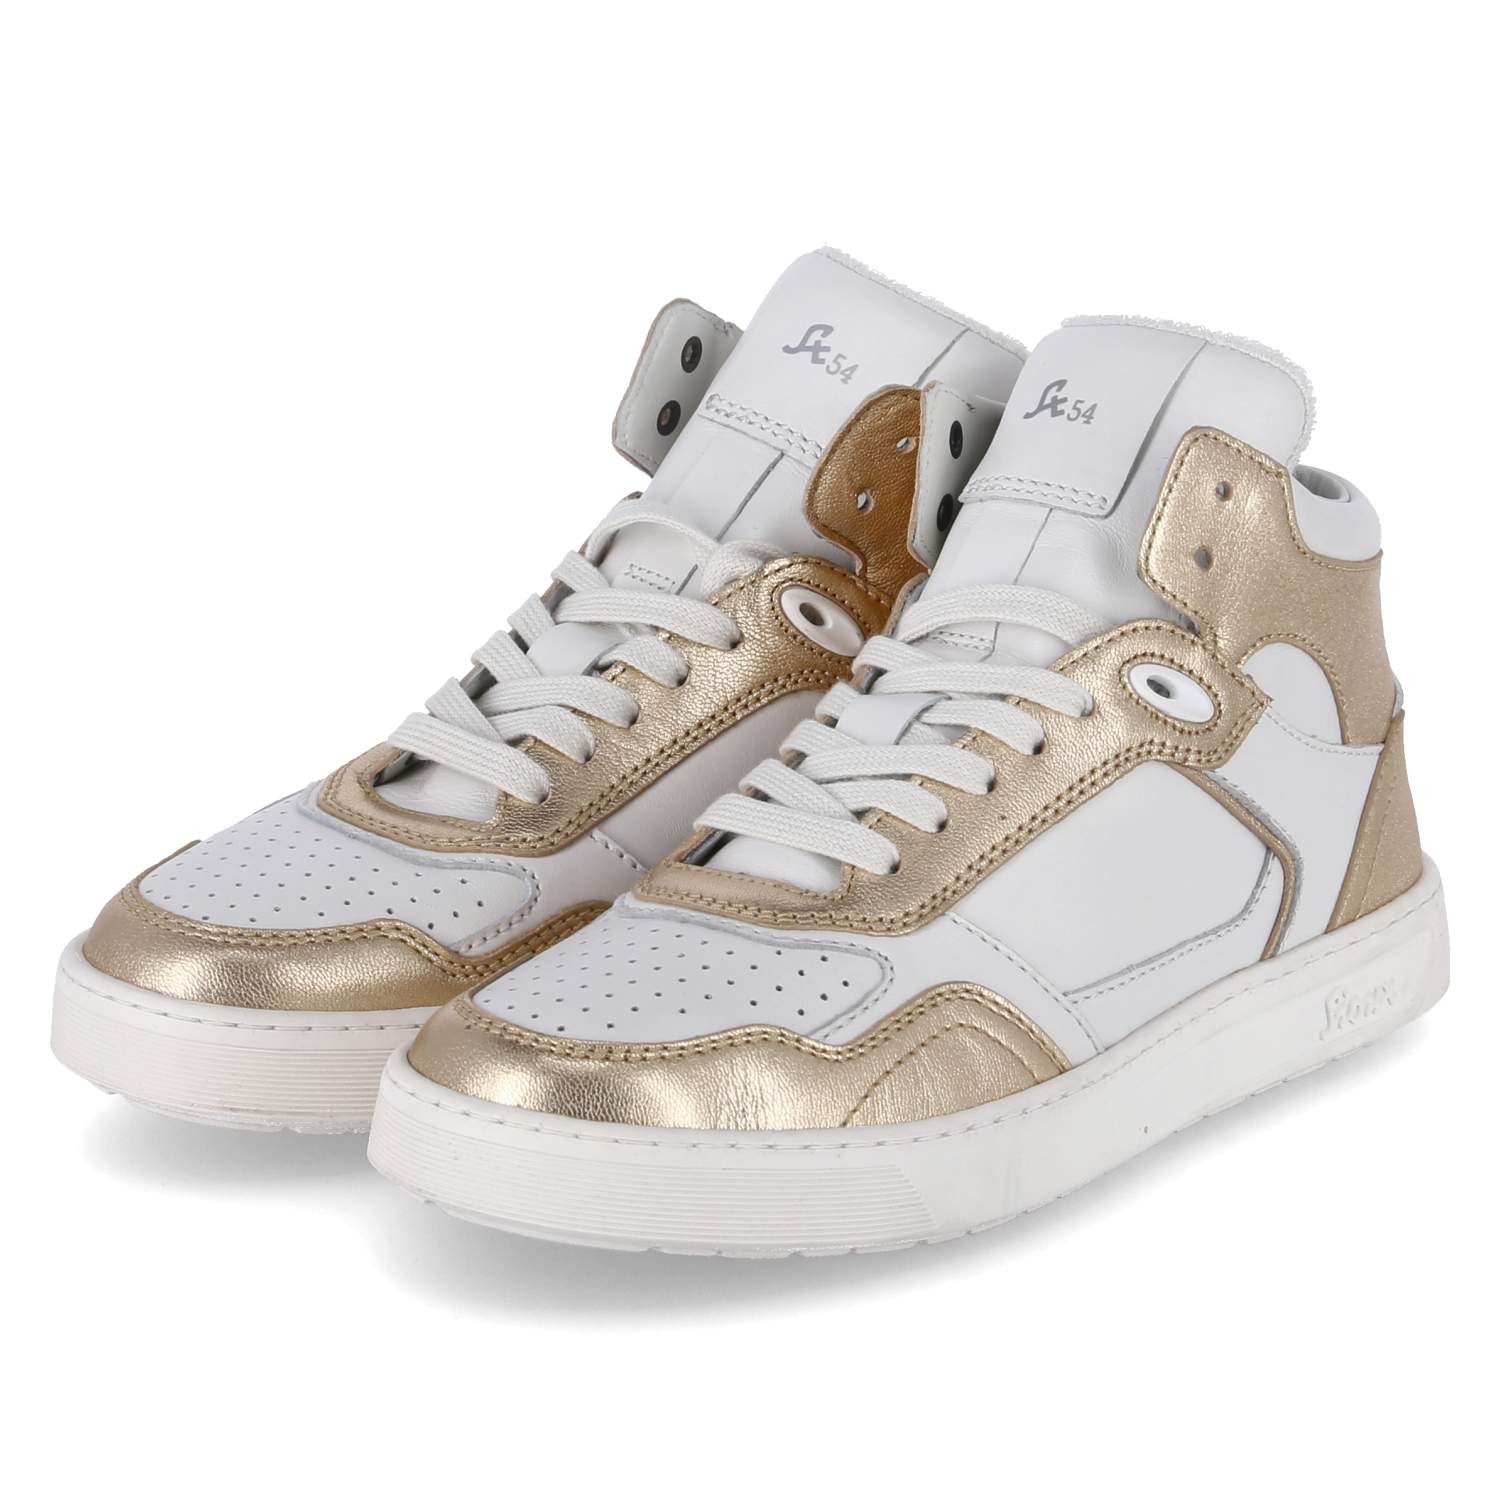 SIOUX Maite x Sioux-Sneaker, Farbauswahl: Weiß/Gold Кросівки